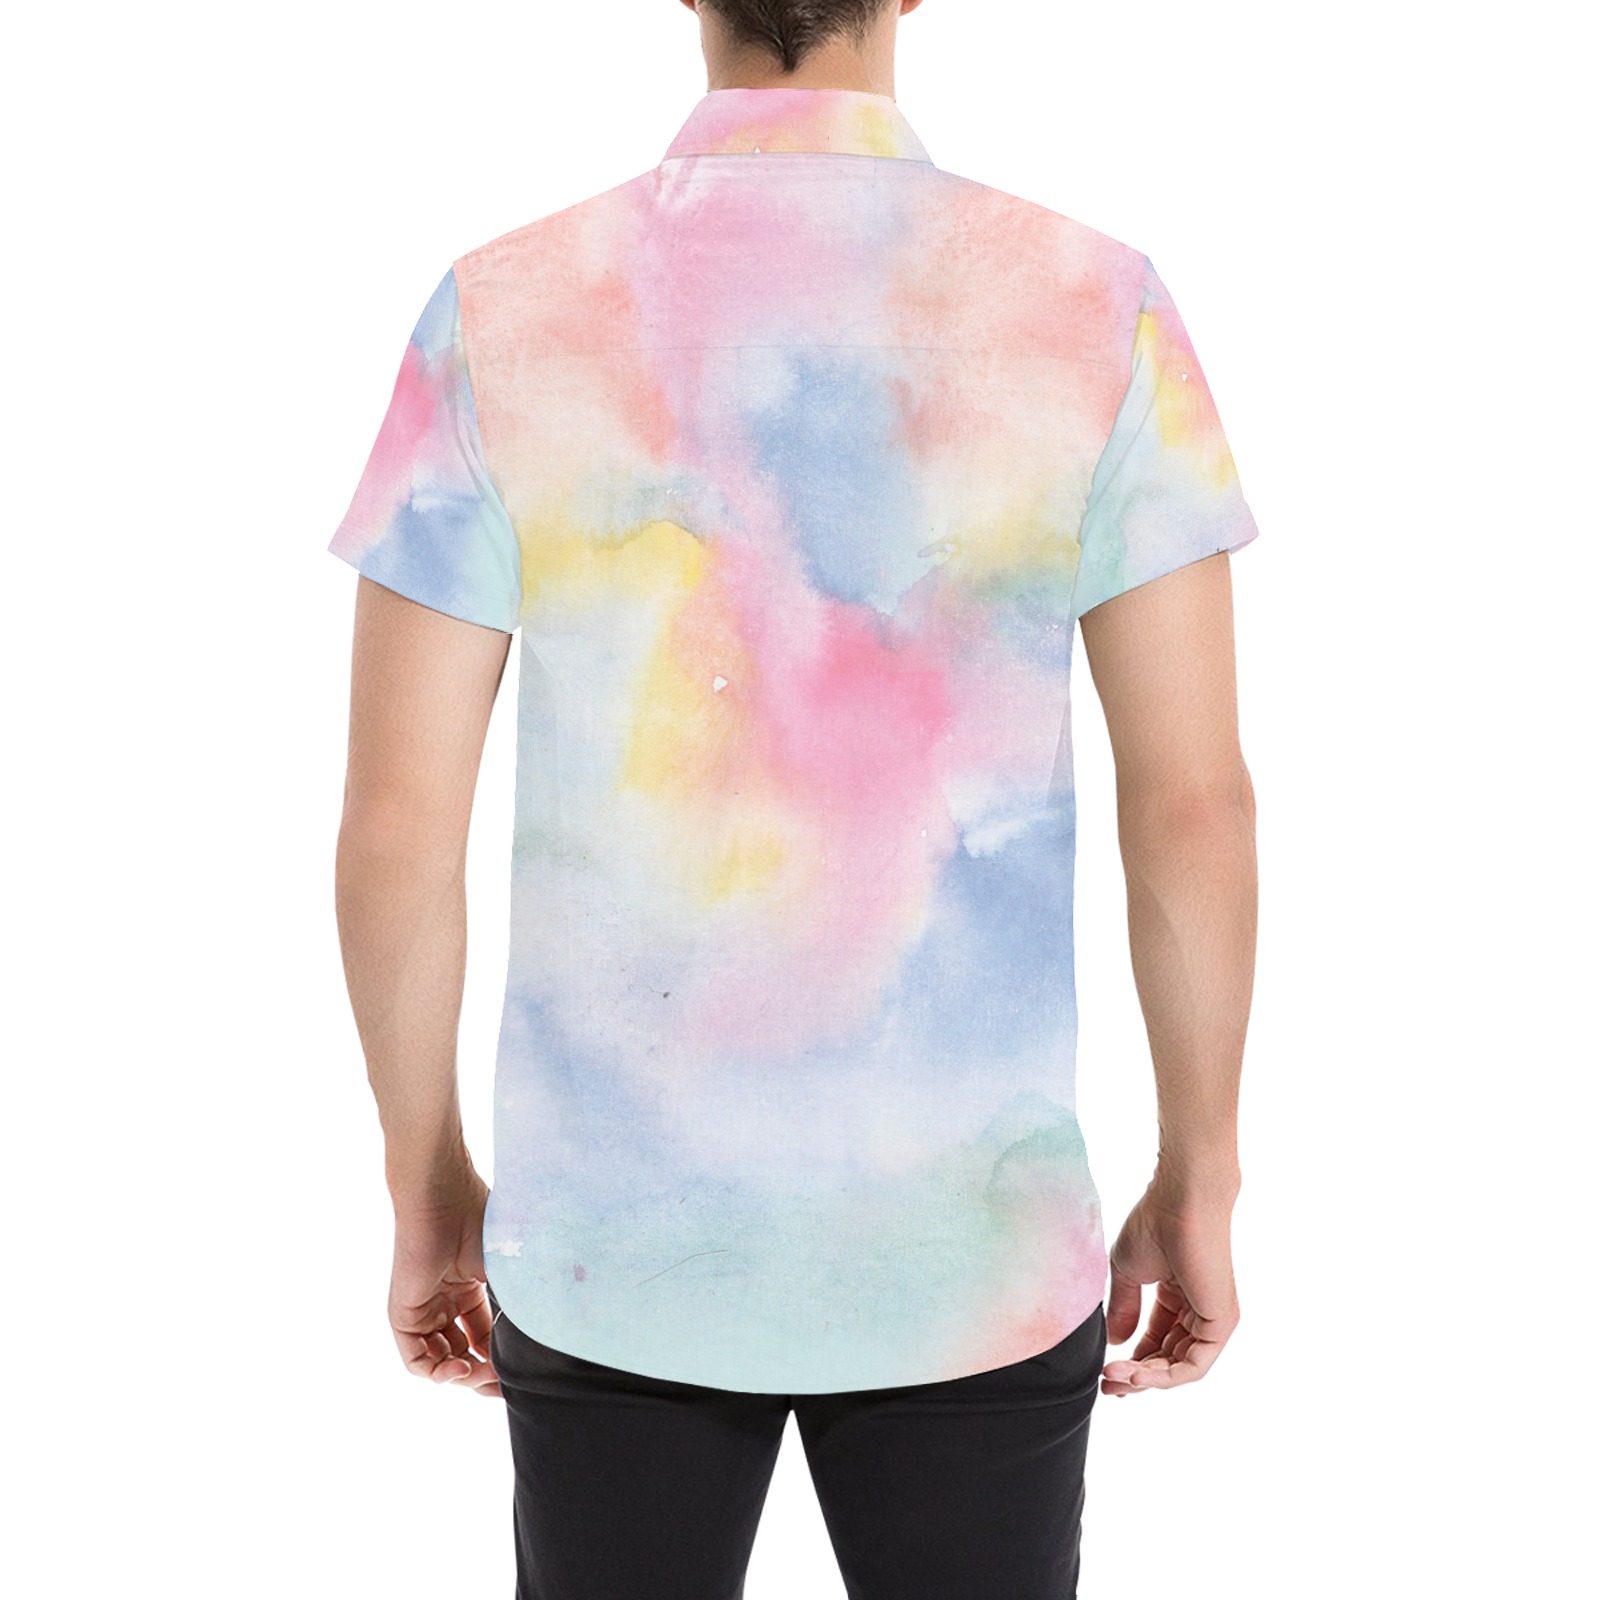 Colorful watercolor Men's All Over Print Short Sleeve Shirt (Model T53)